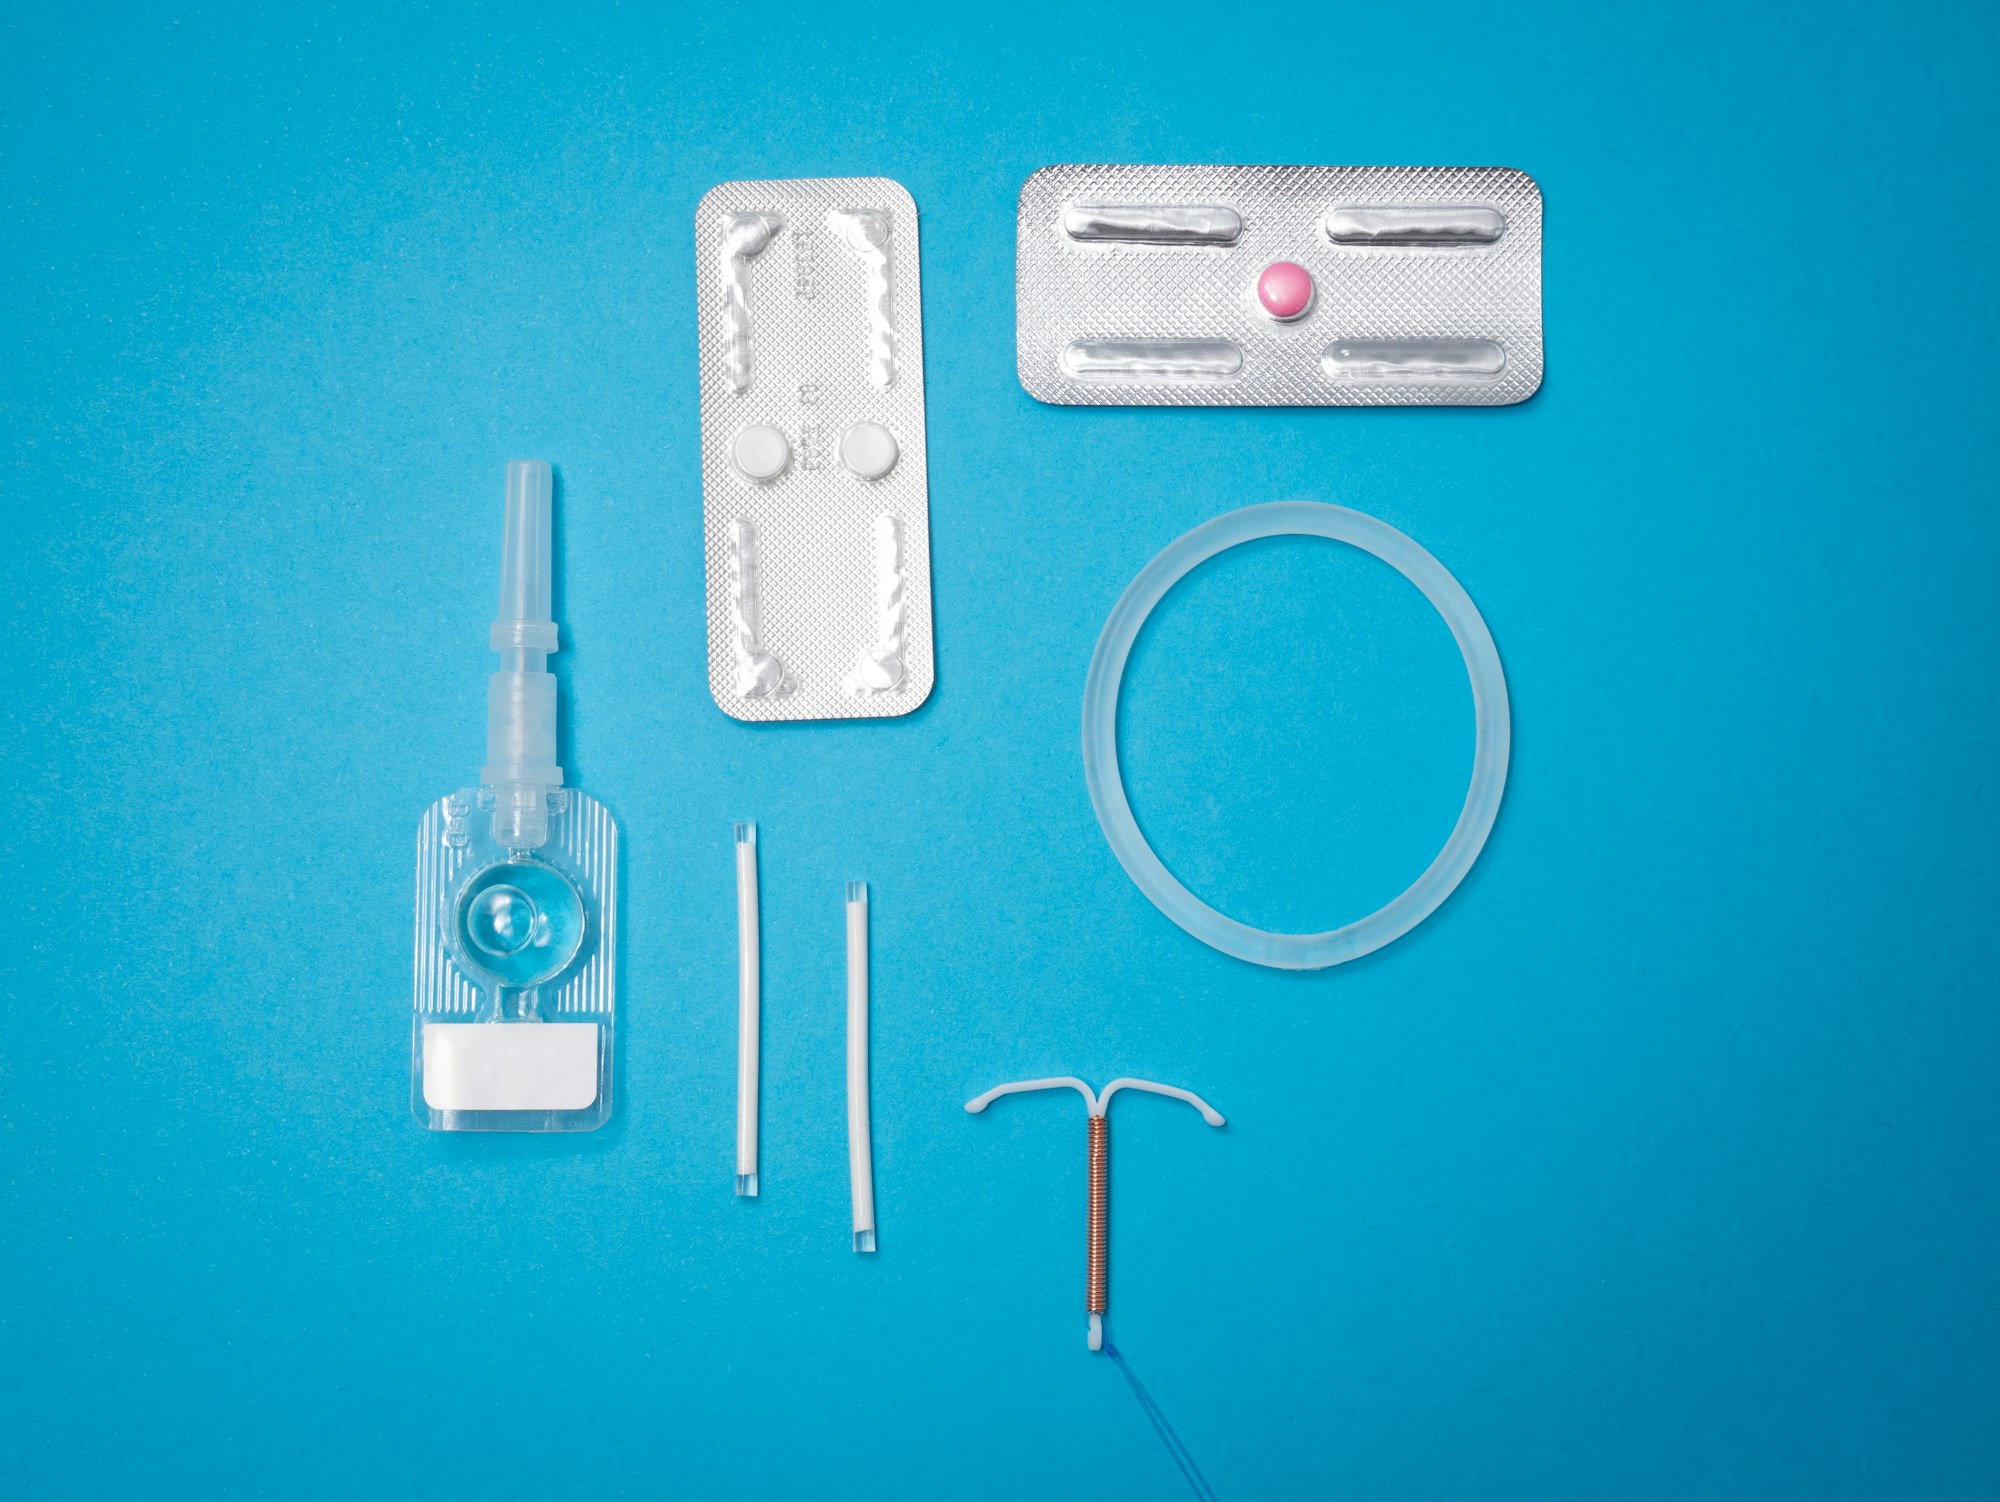 Selection of reproductive health supplies: DMPA, Implants, Emergency Contraceptives, IUD, Vaginal ring